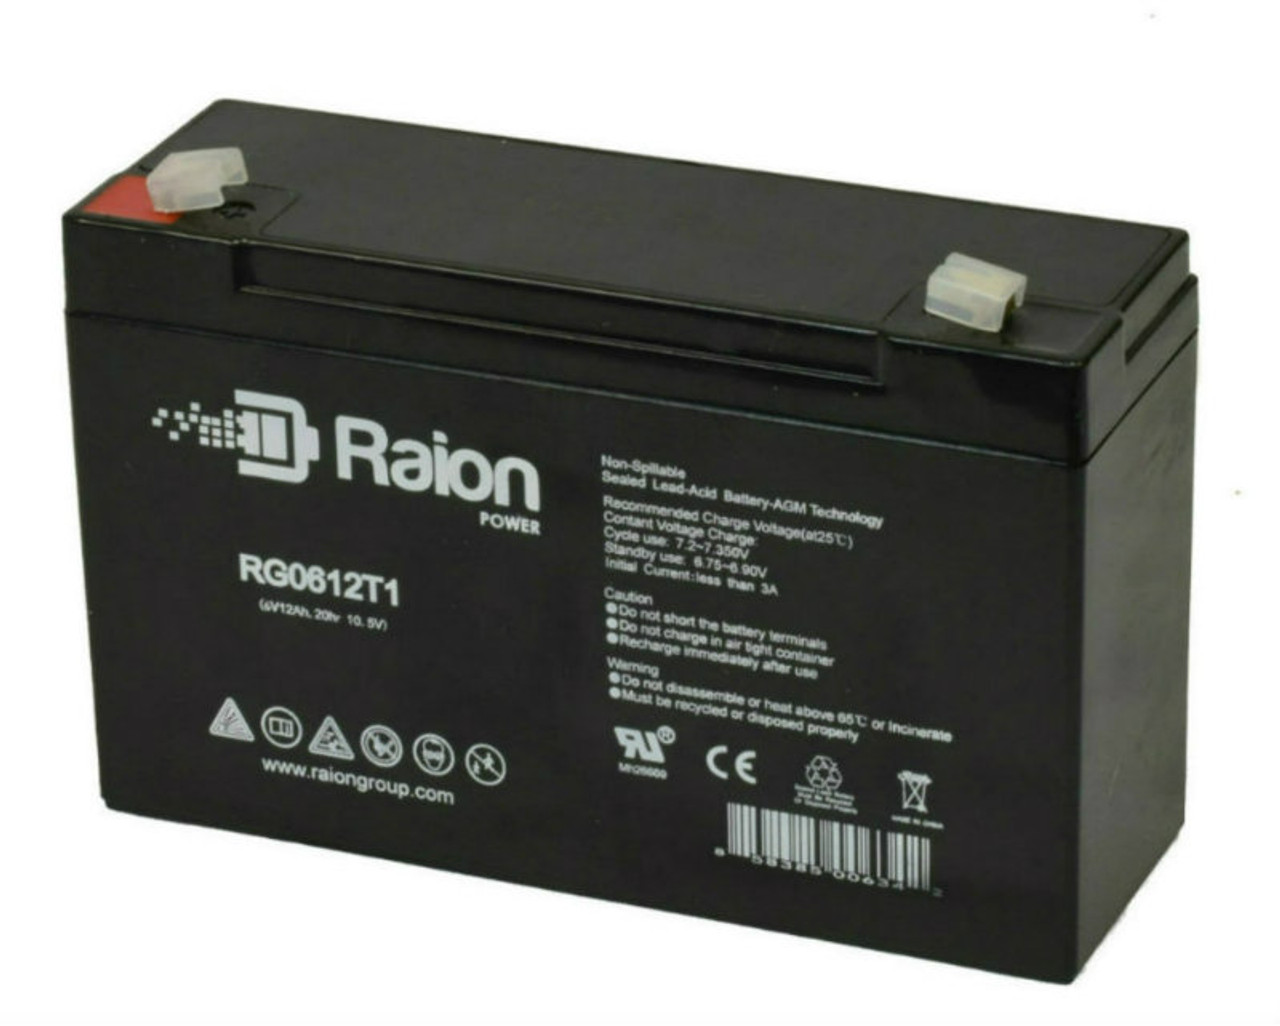 Raion Power RG06120T1 Replacement Battery for Leadhoo NP12-6D